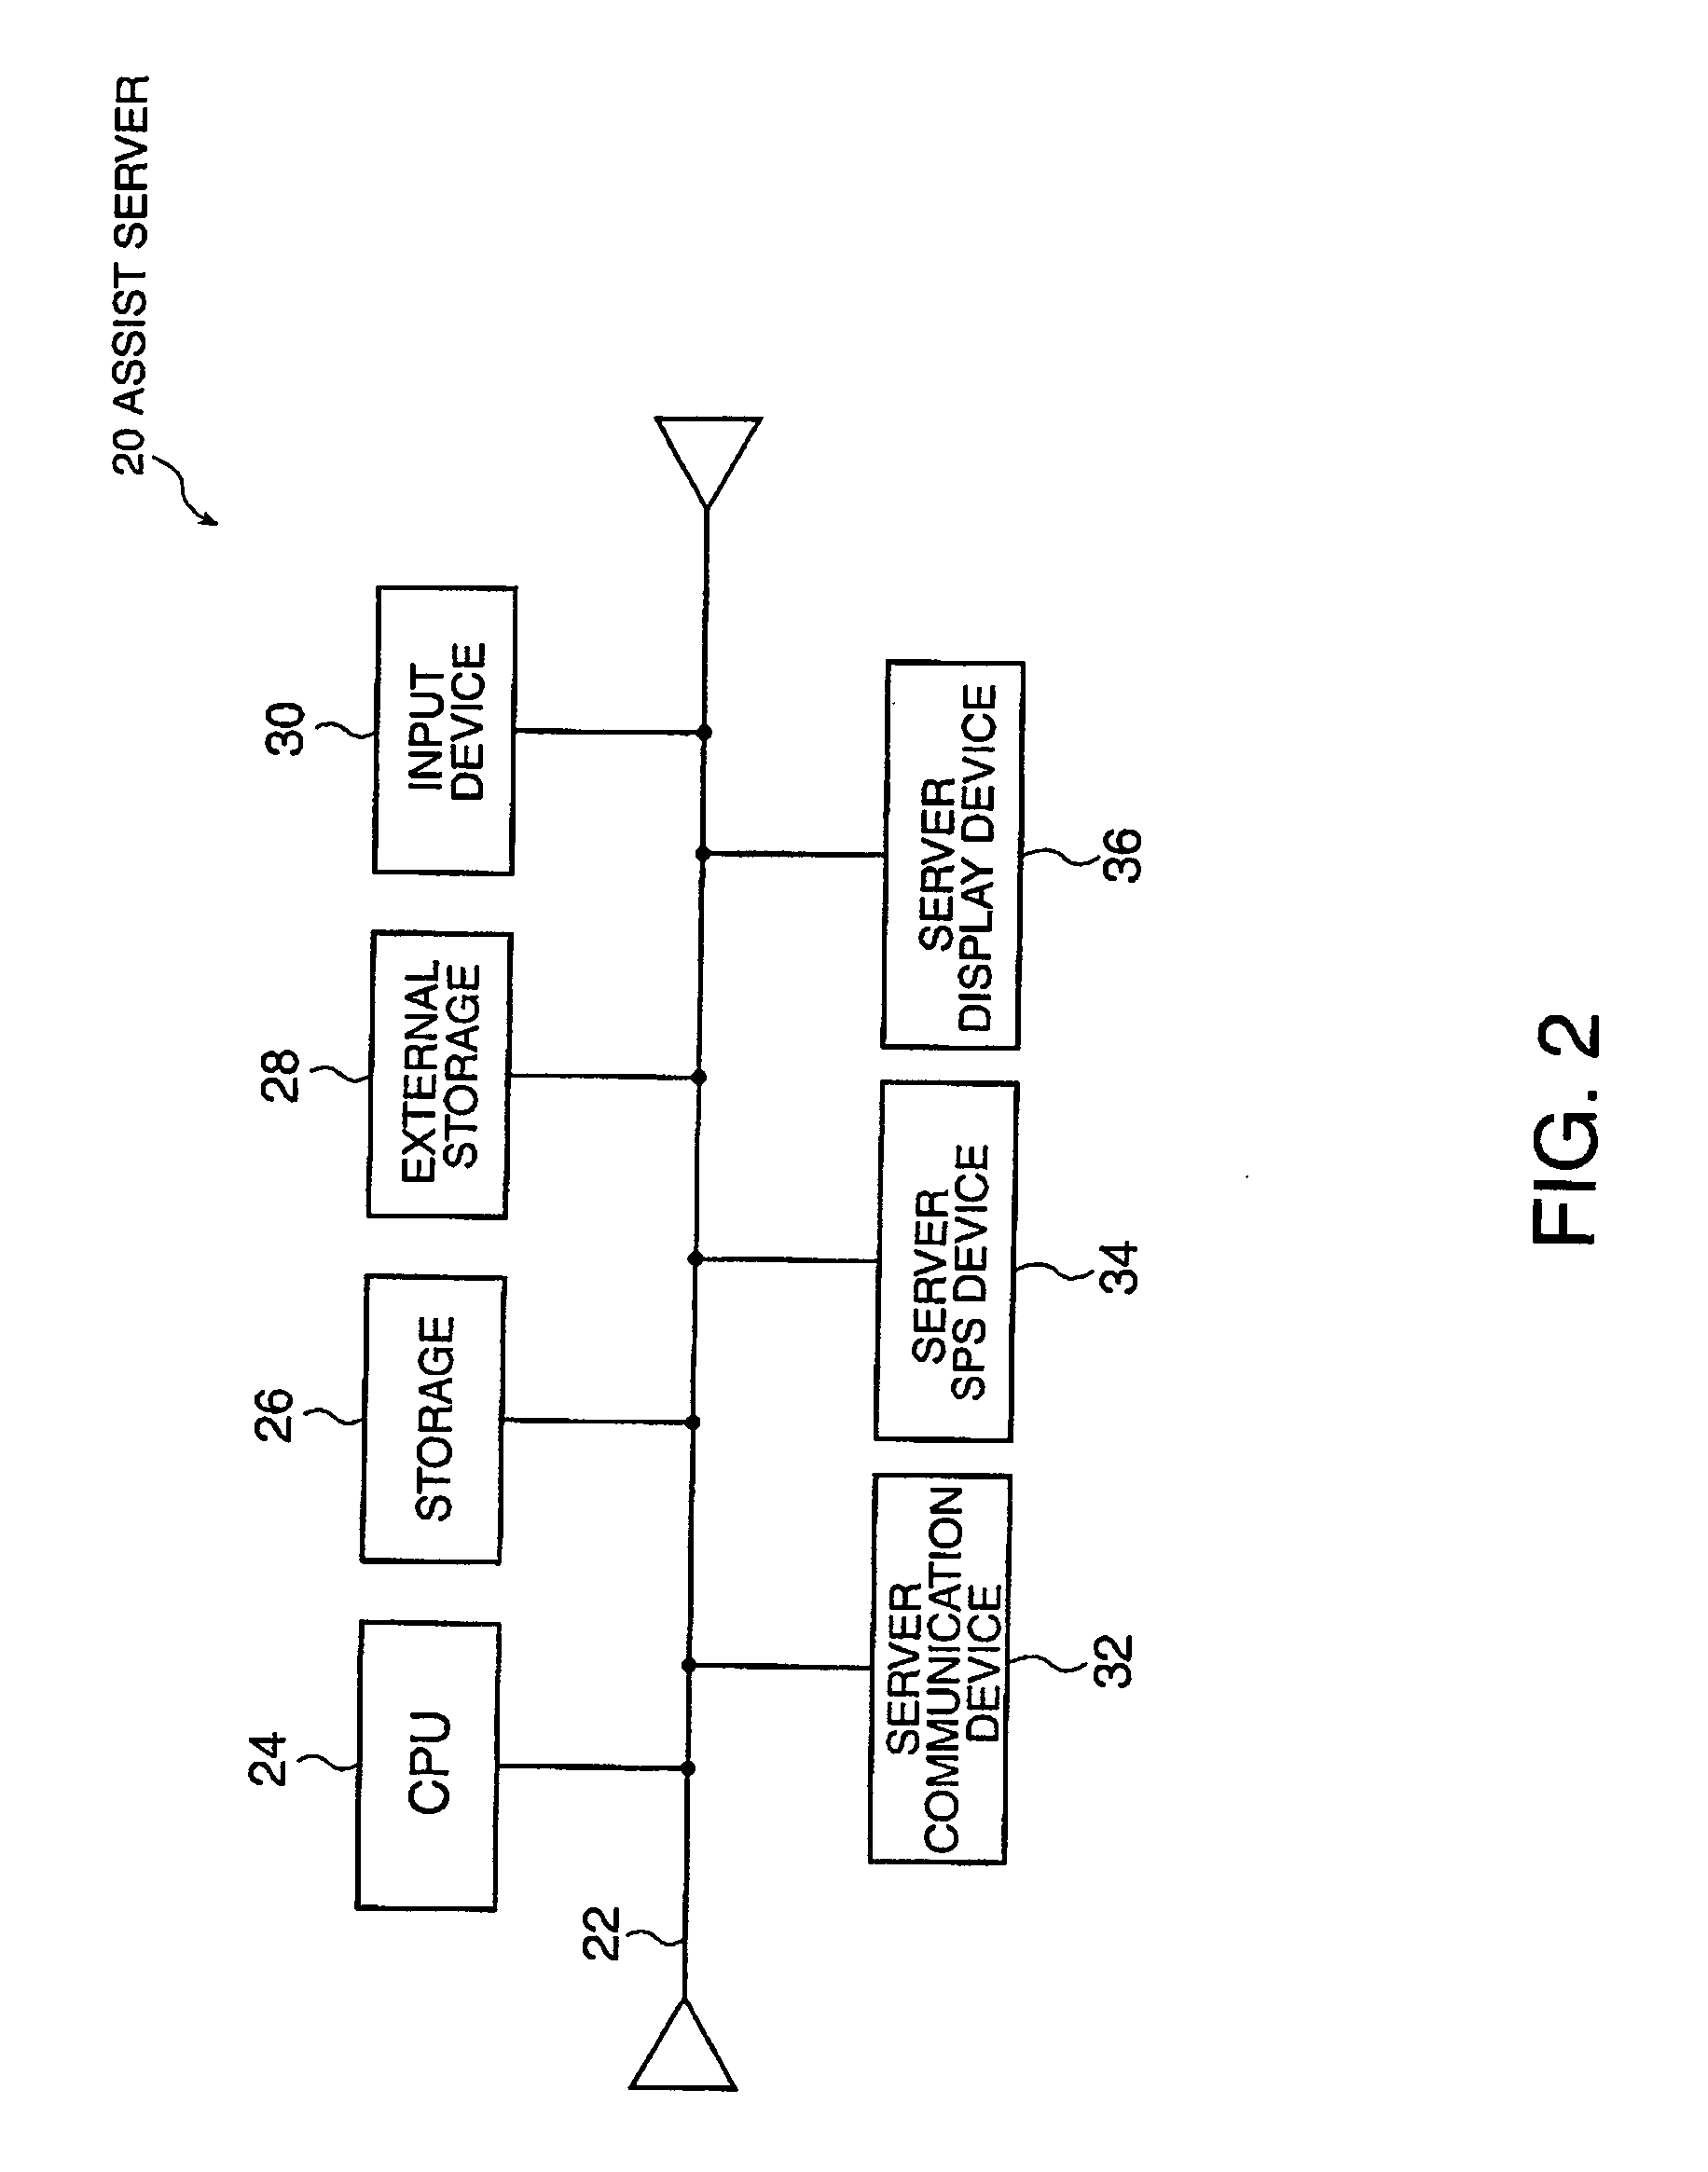 Positioning system, terminal apparatus, control program for terminal apparatus, and computer readable recording medium having recorded therein control program for terminal apparatus